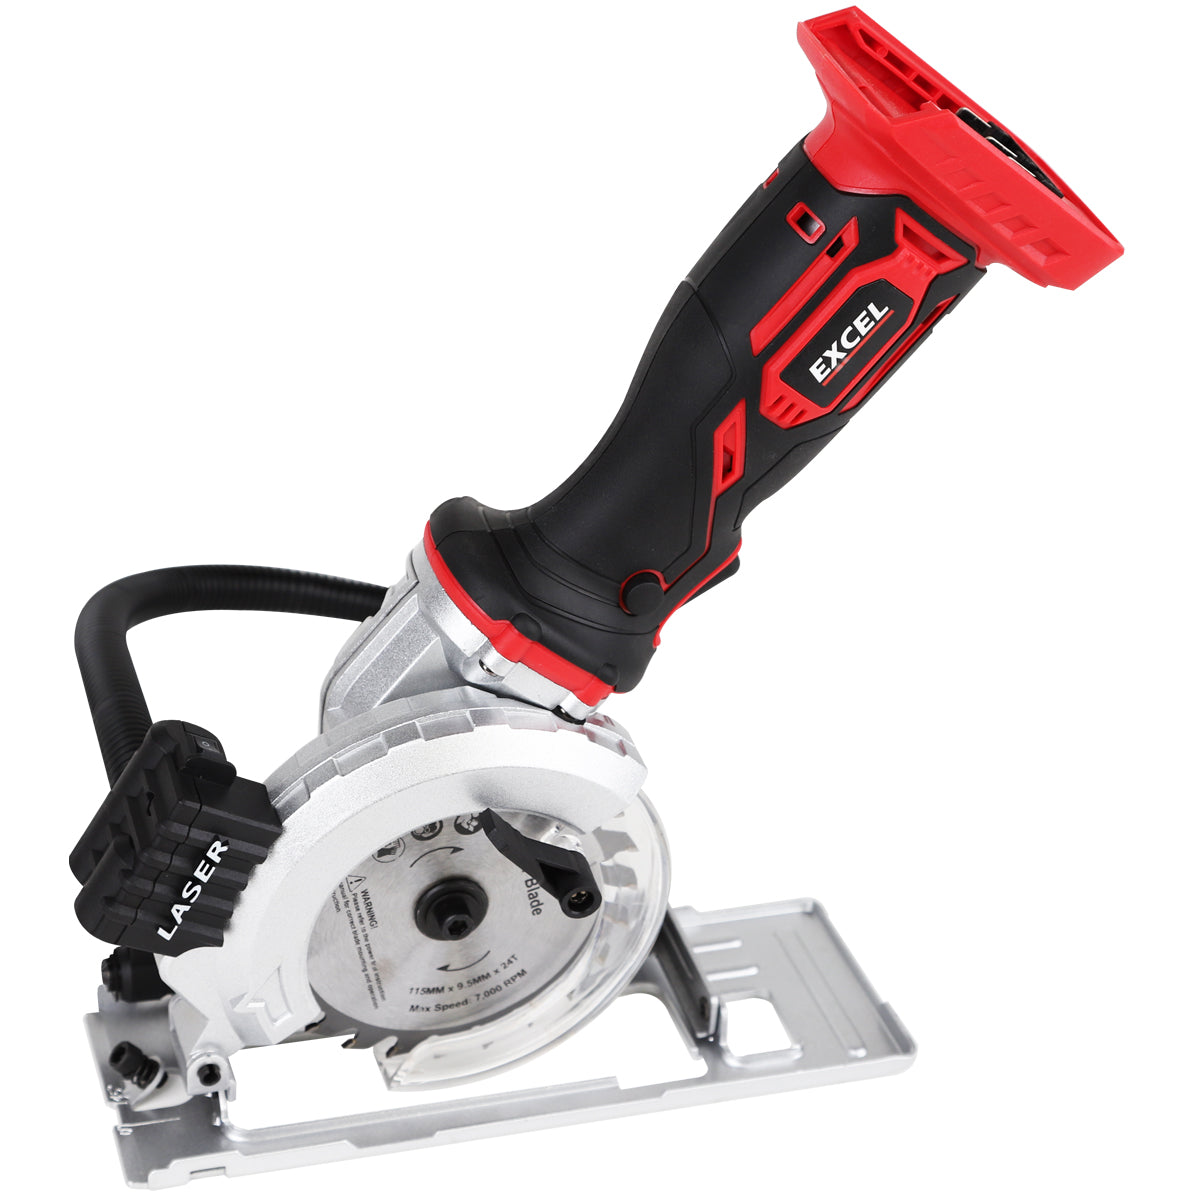 Excel 18V 115mm Mini Circular Saw with 2 x 2.0Ah Battery & Charger